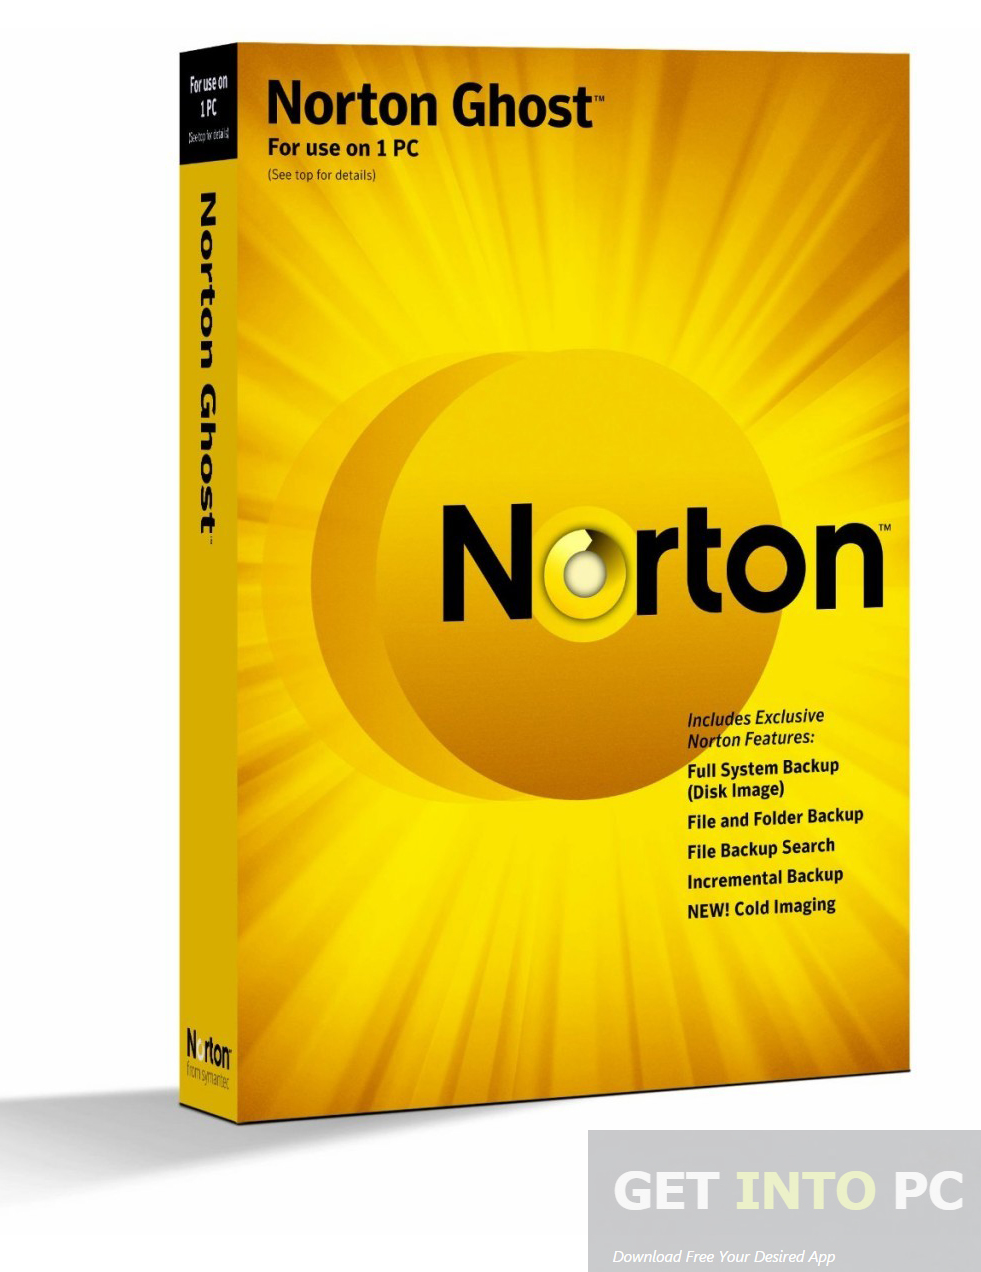 Norton ghost 15 recovery disk iso download